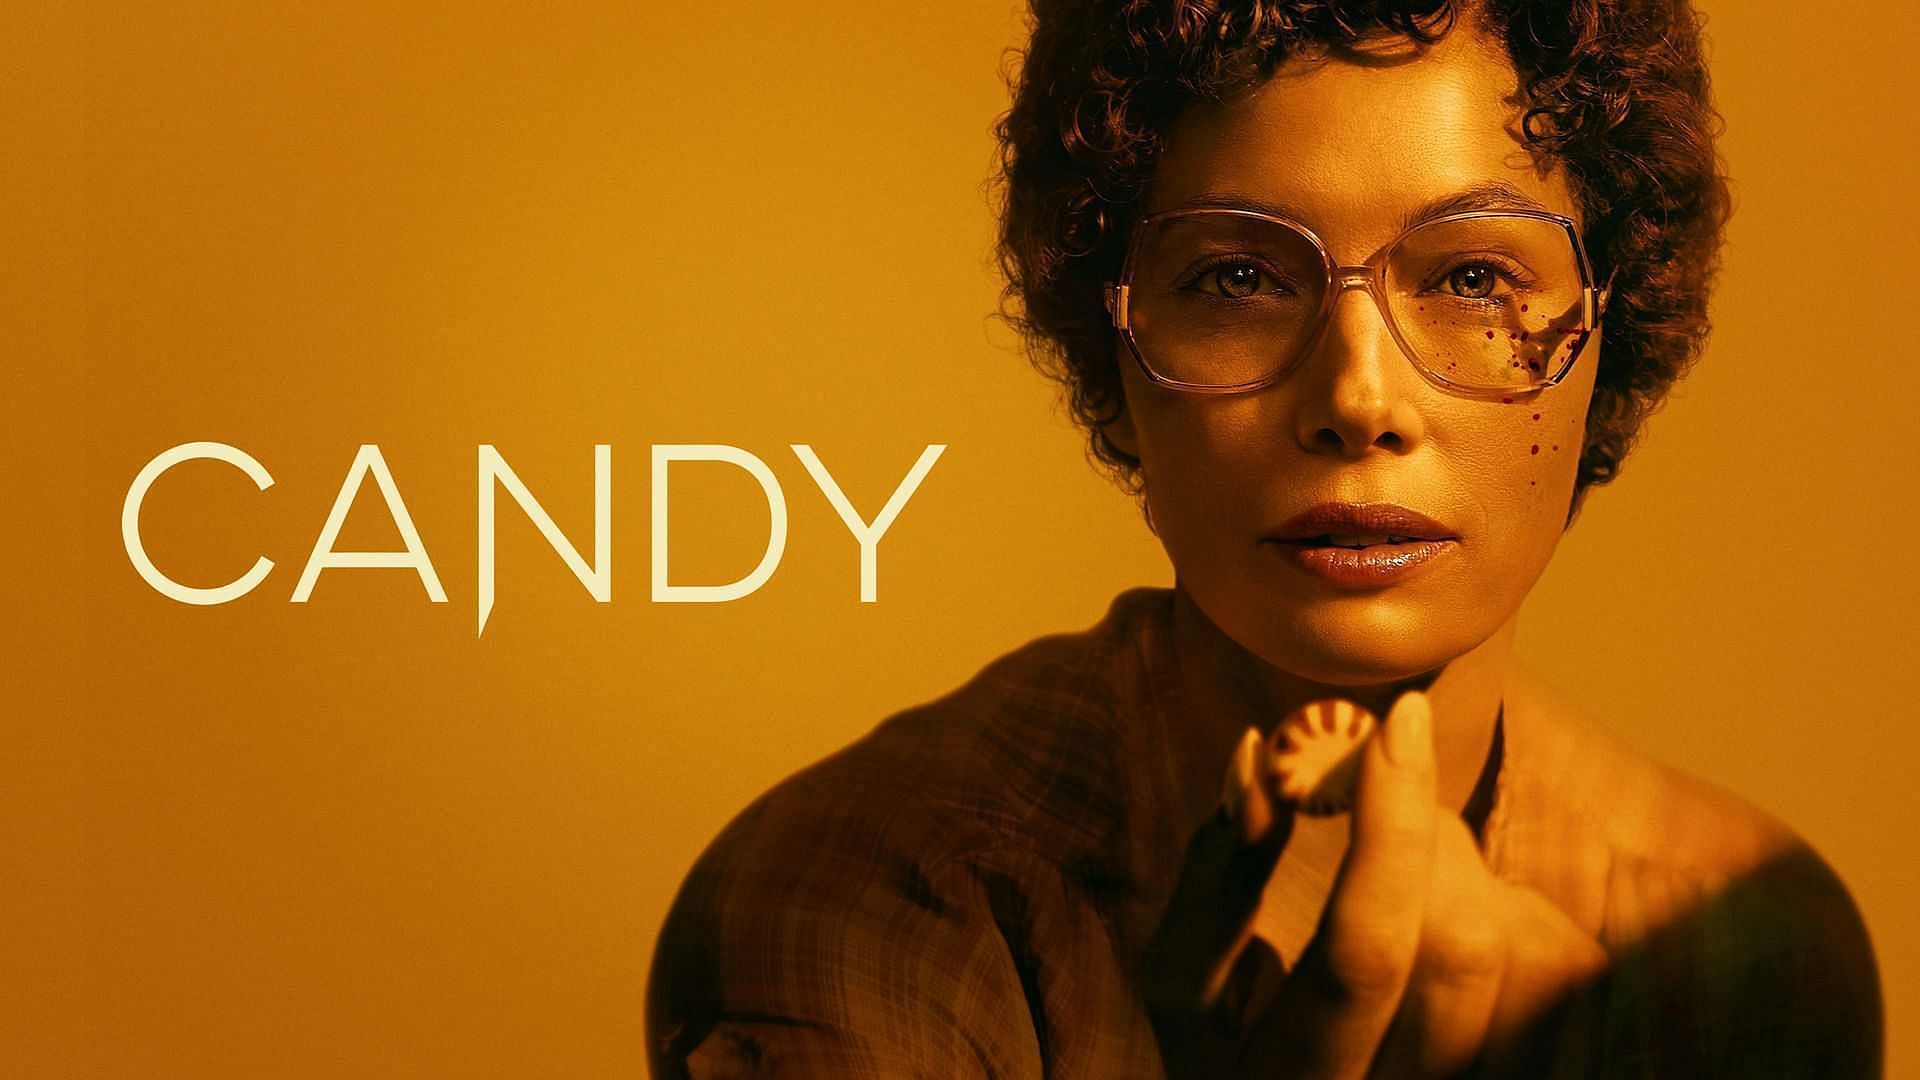 Hulu&#039;s official poster for Candy starring Jessica Biel (Image via Hulu)